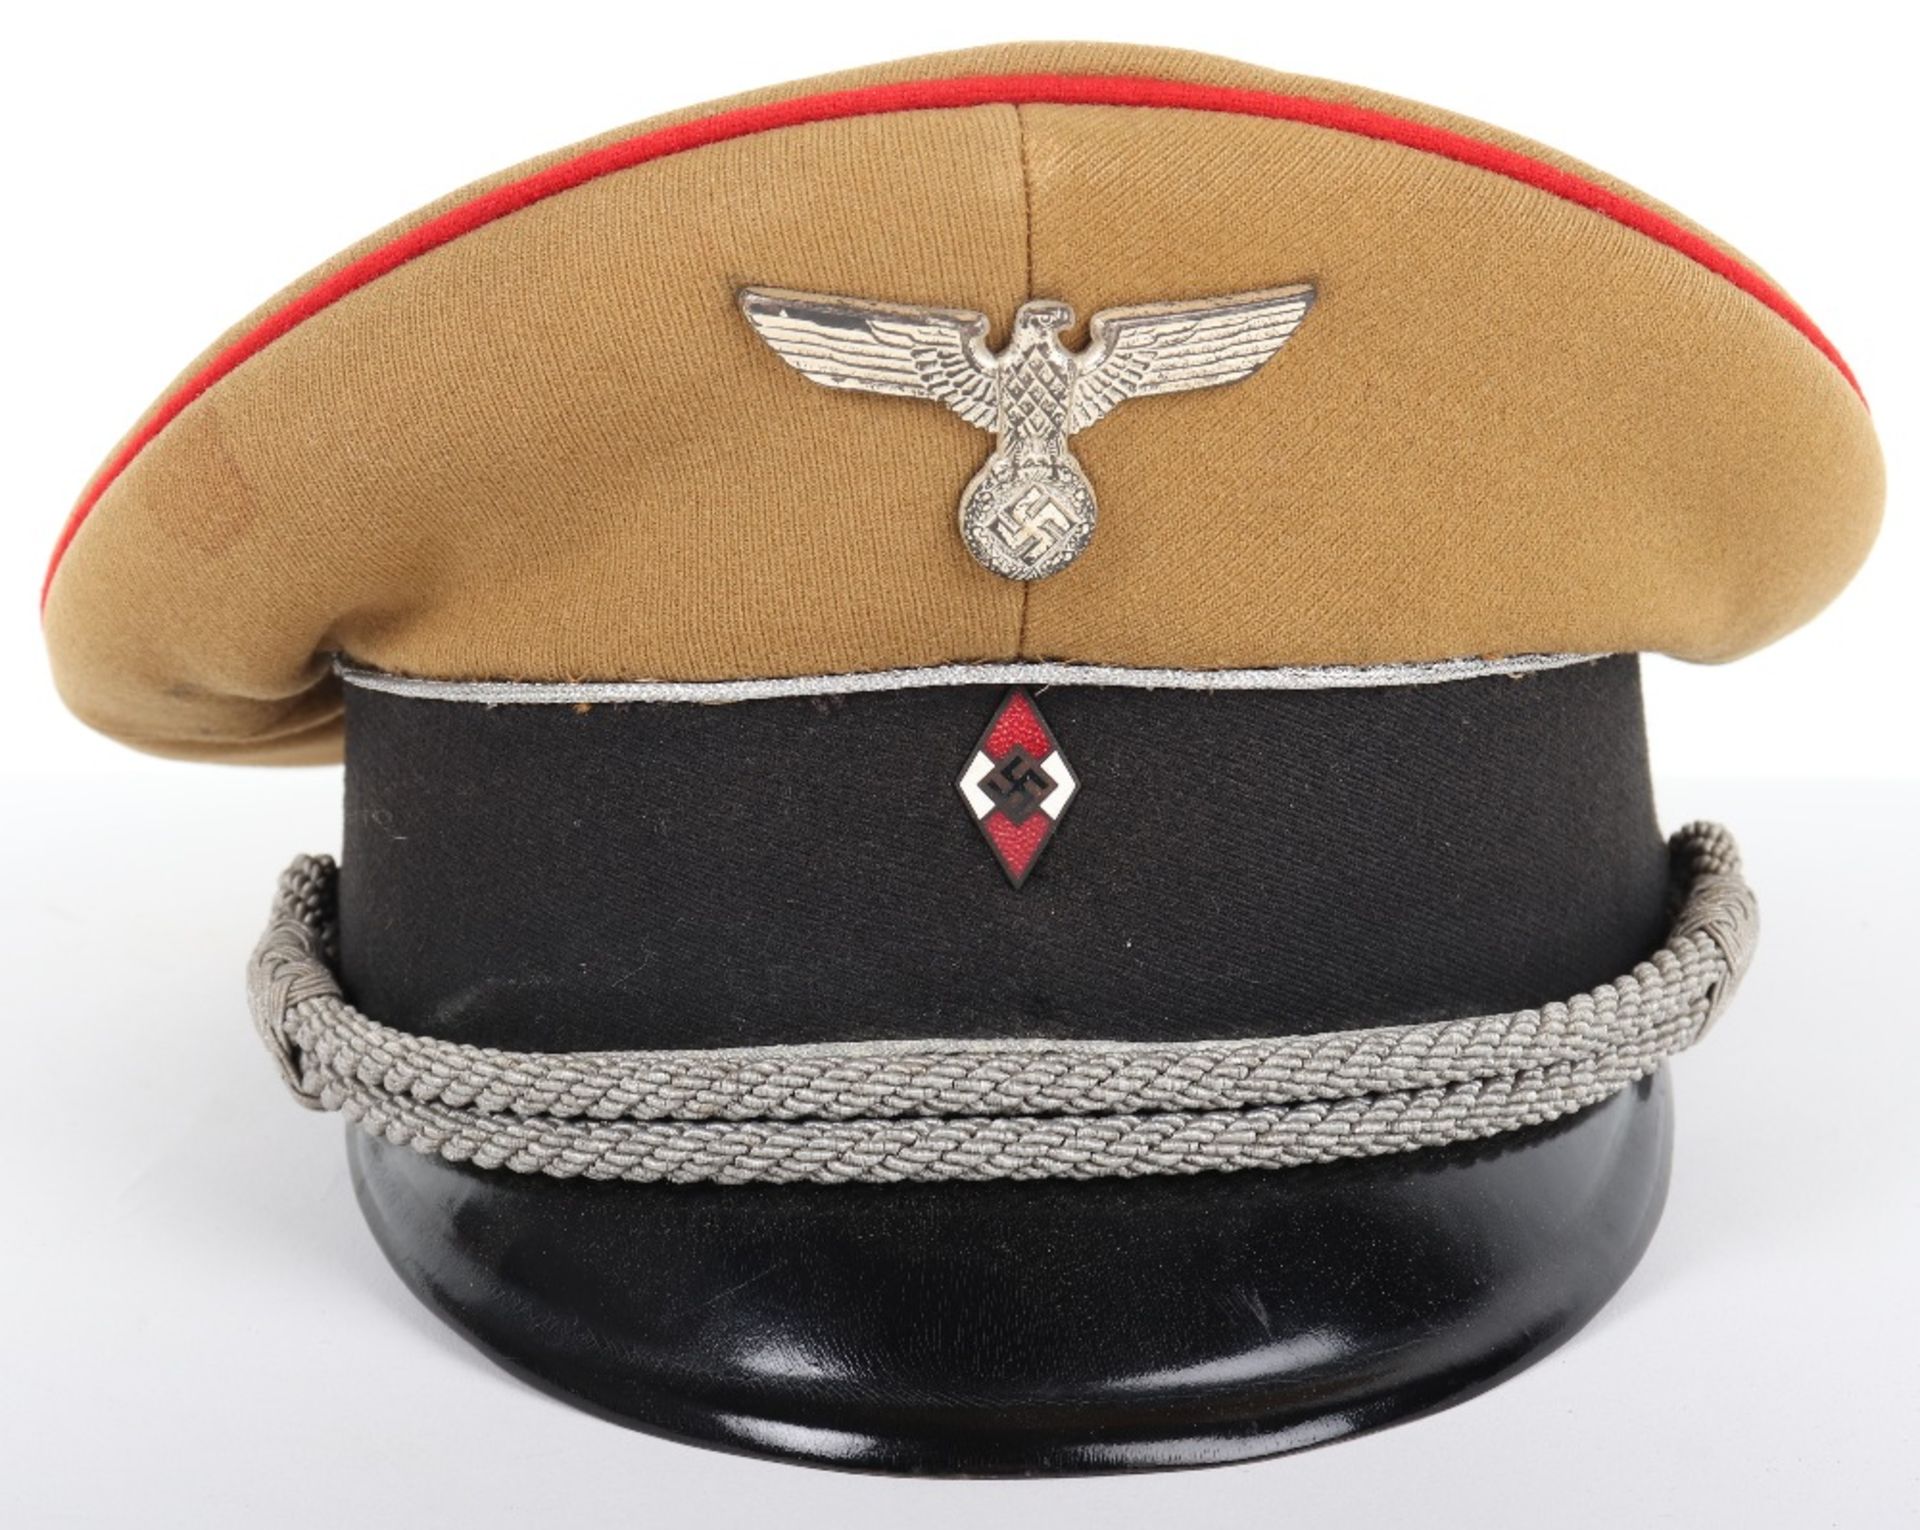 Third Reich Hitler Youth Leaders Peaked Cap